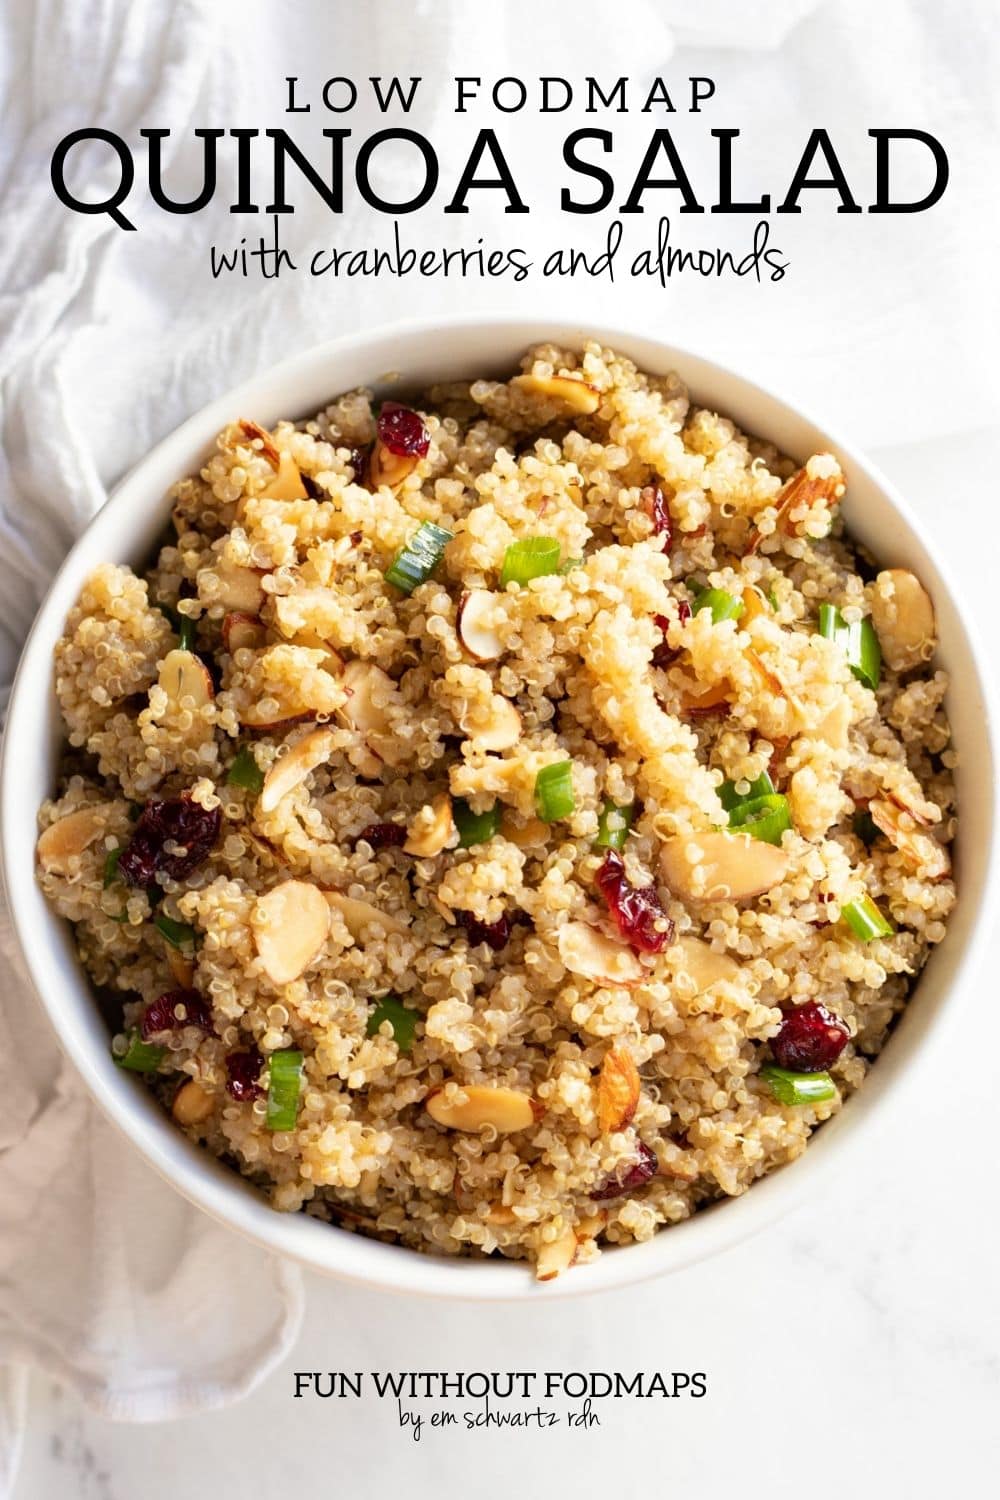 A bowl of quinoa salad dotted with toasted almonds and dried cranberries. In the white space above the bowl, a black text overlay reads "Low FODMAP Quinoa Salad with Cranberries and Almonds."